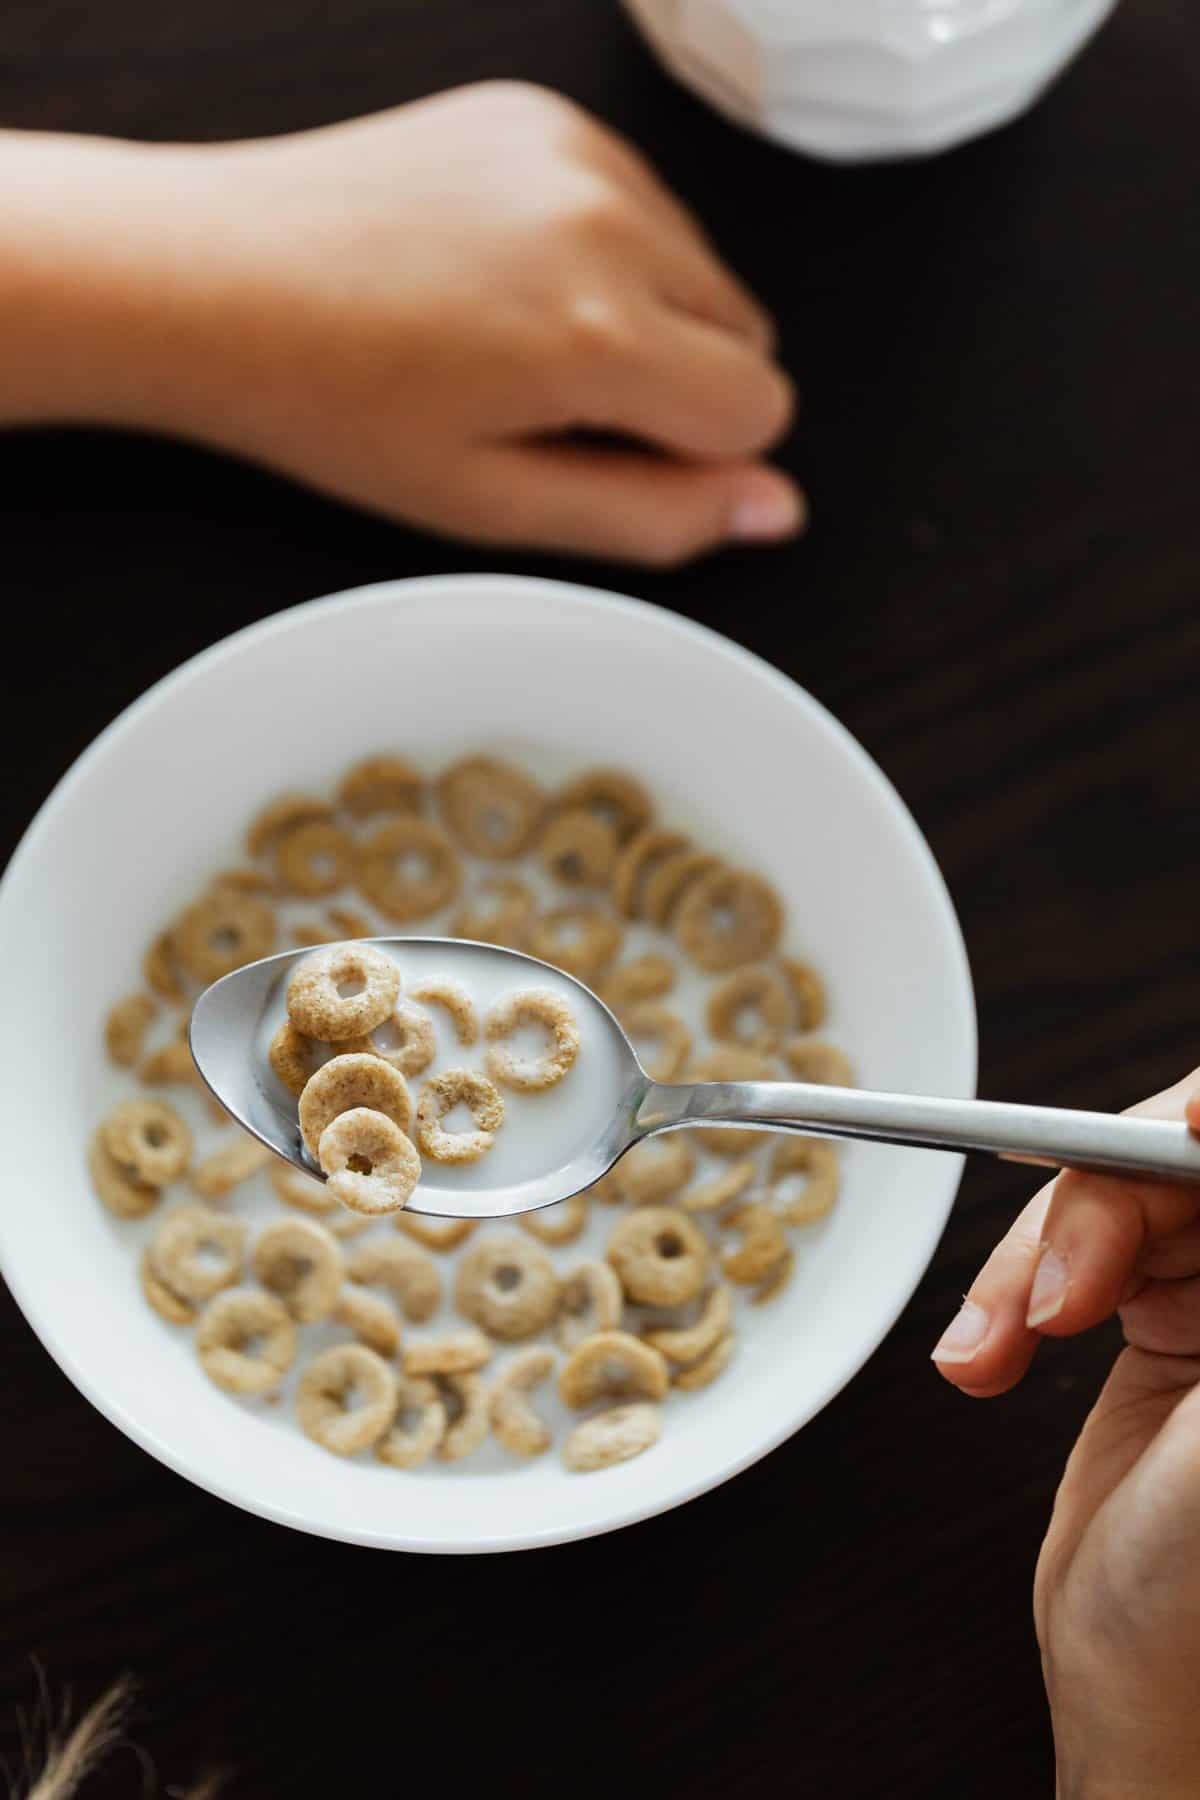 Gluten Free Cereal in a white bowl with a spoon in a hand